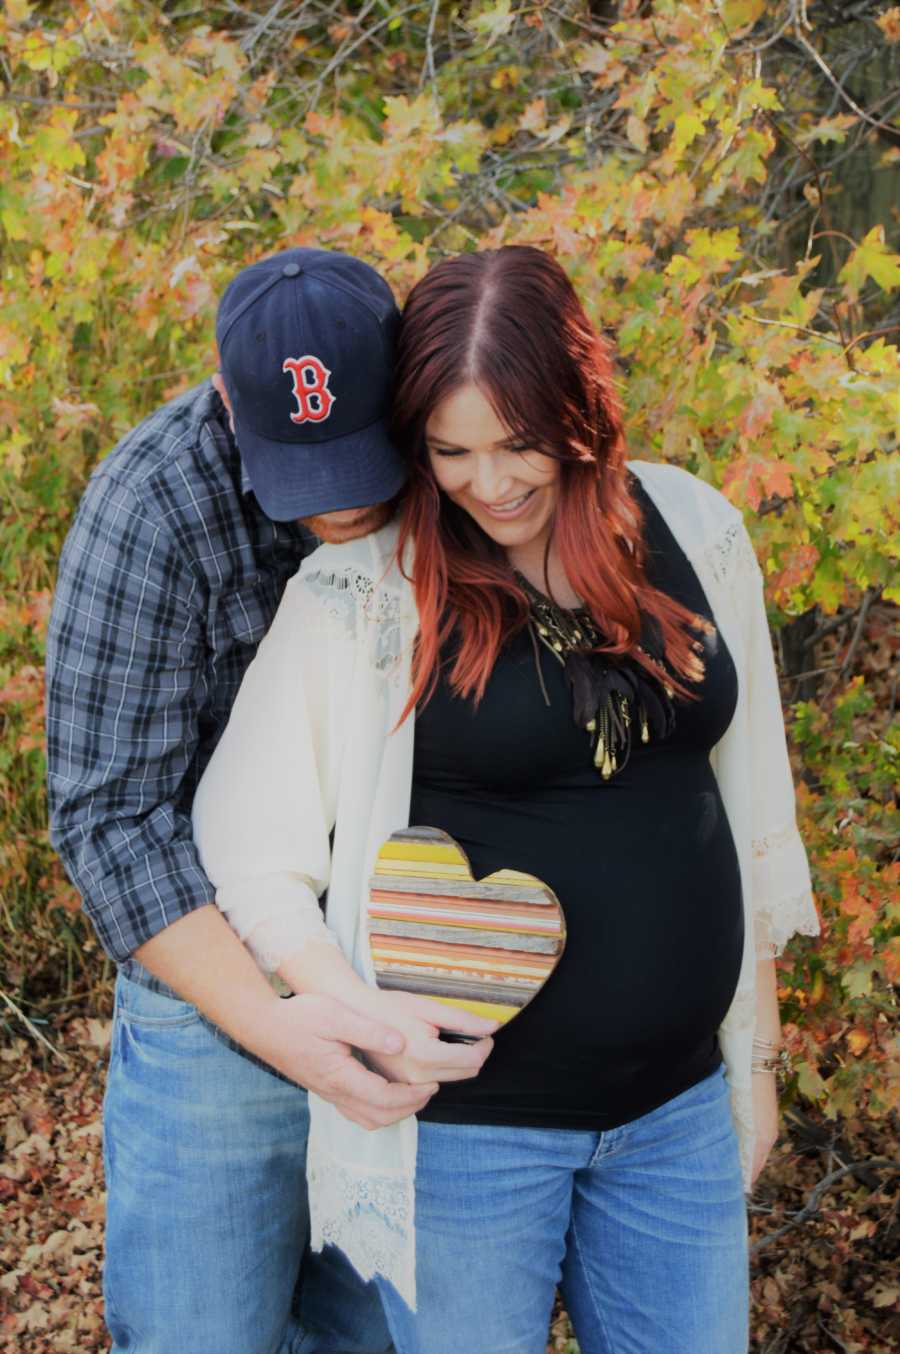 Pregnant wife smiles as she holds wooden heart and husband stands behind her with chin on her shoulder